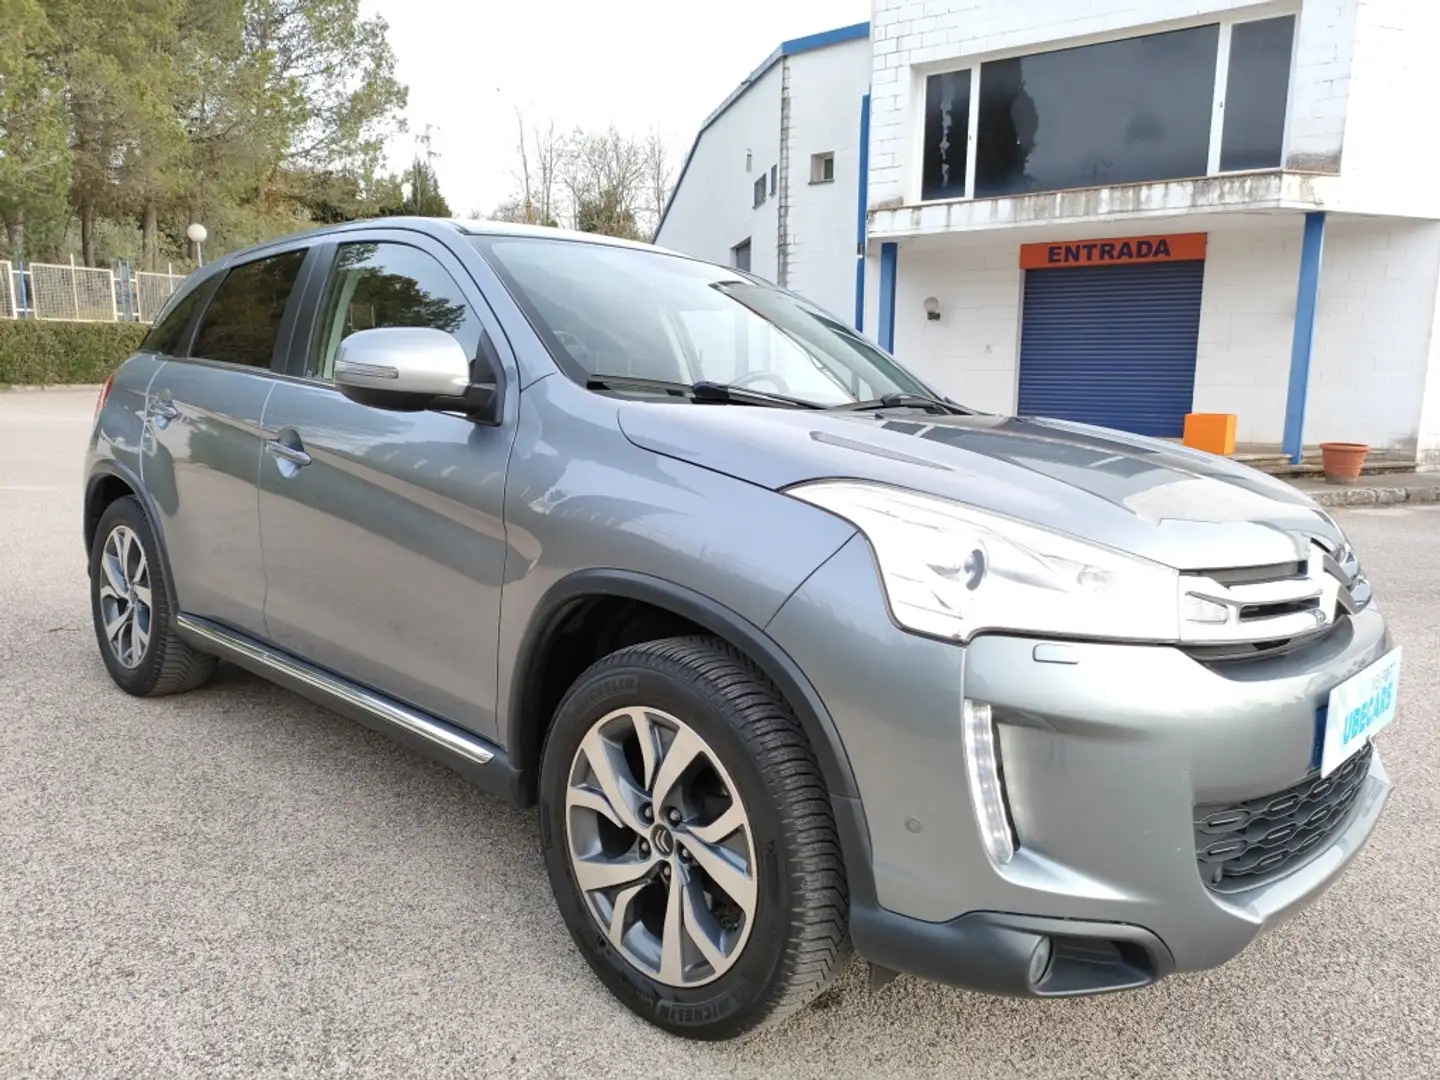 Citroen C4 Aircross 1.6HDI S&S Exclusive 4WD 115 siva - 2